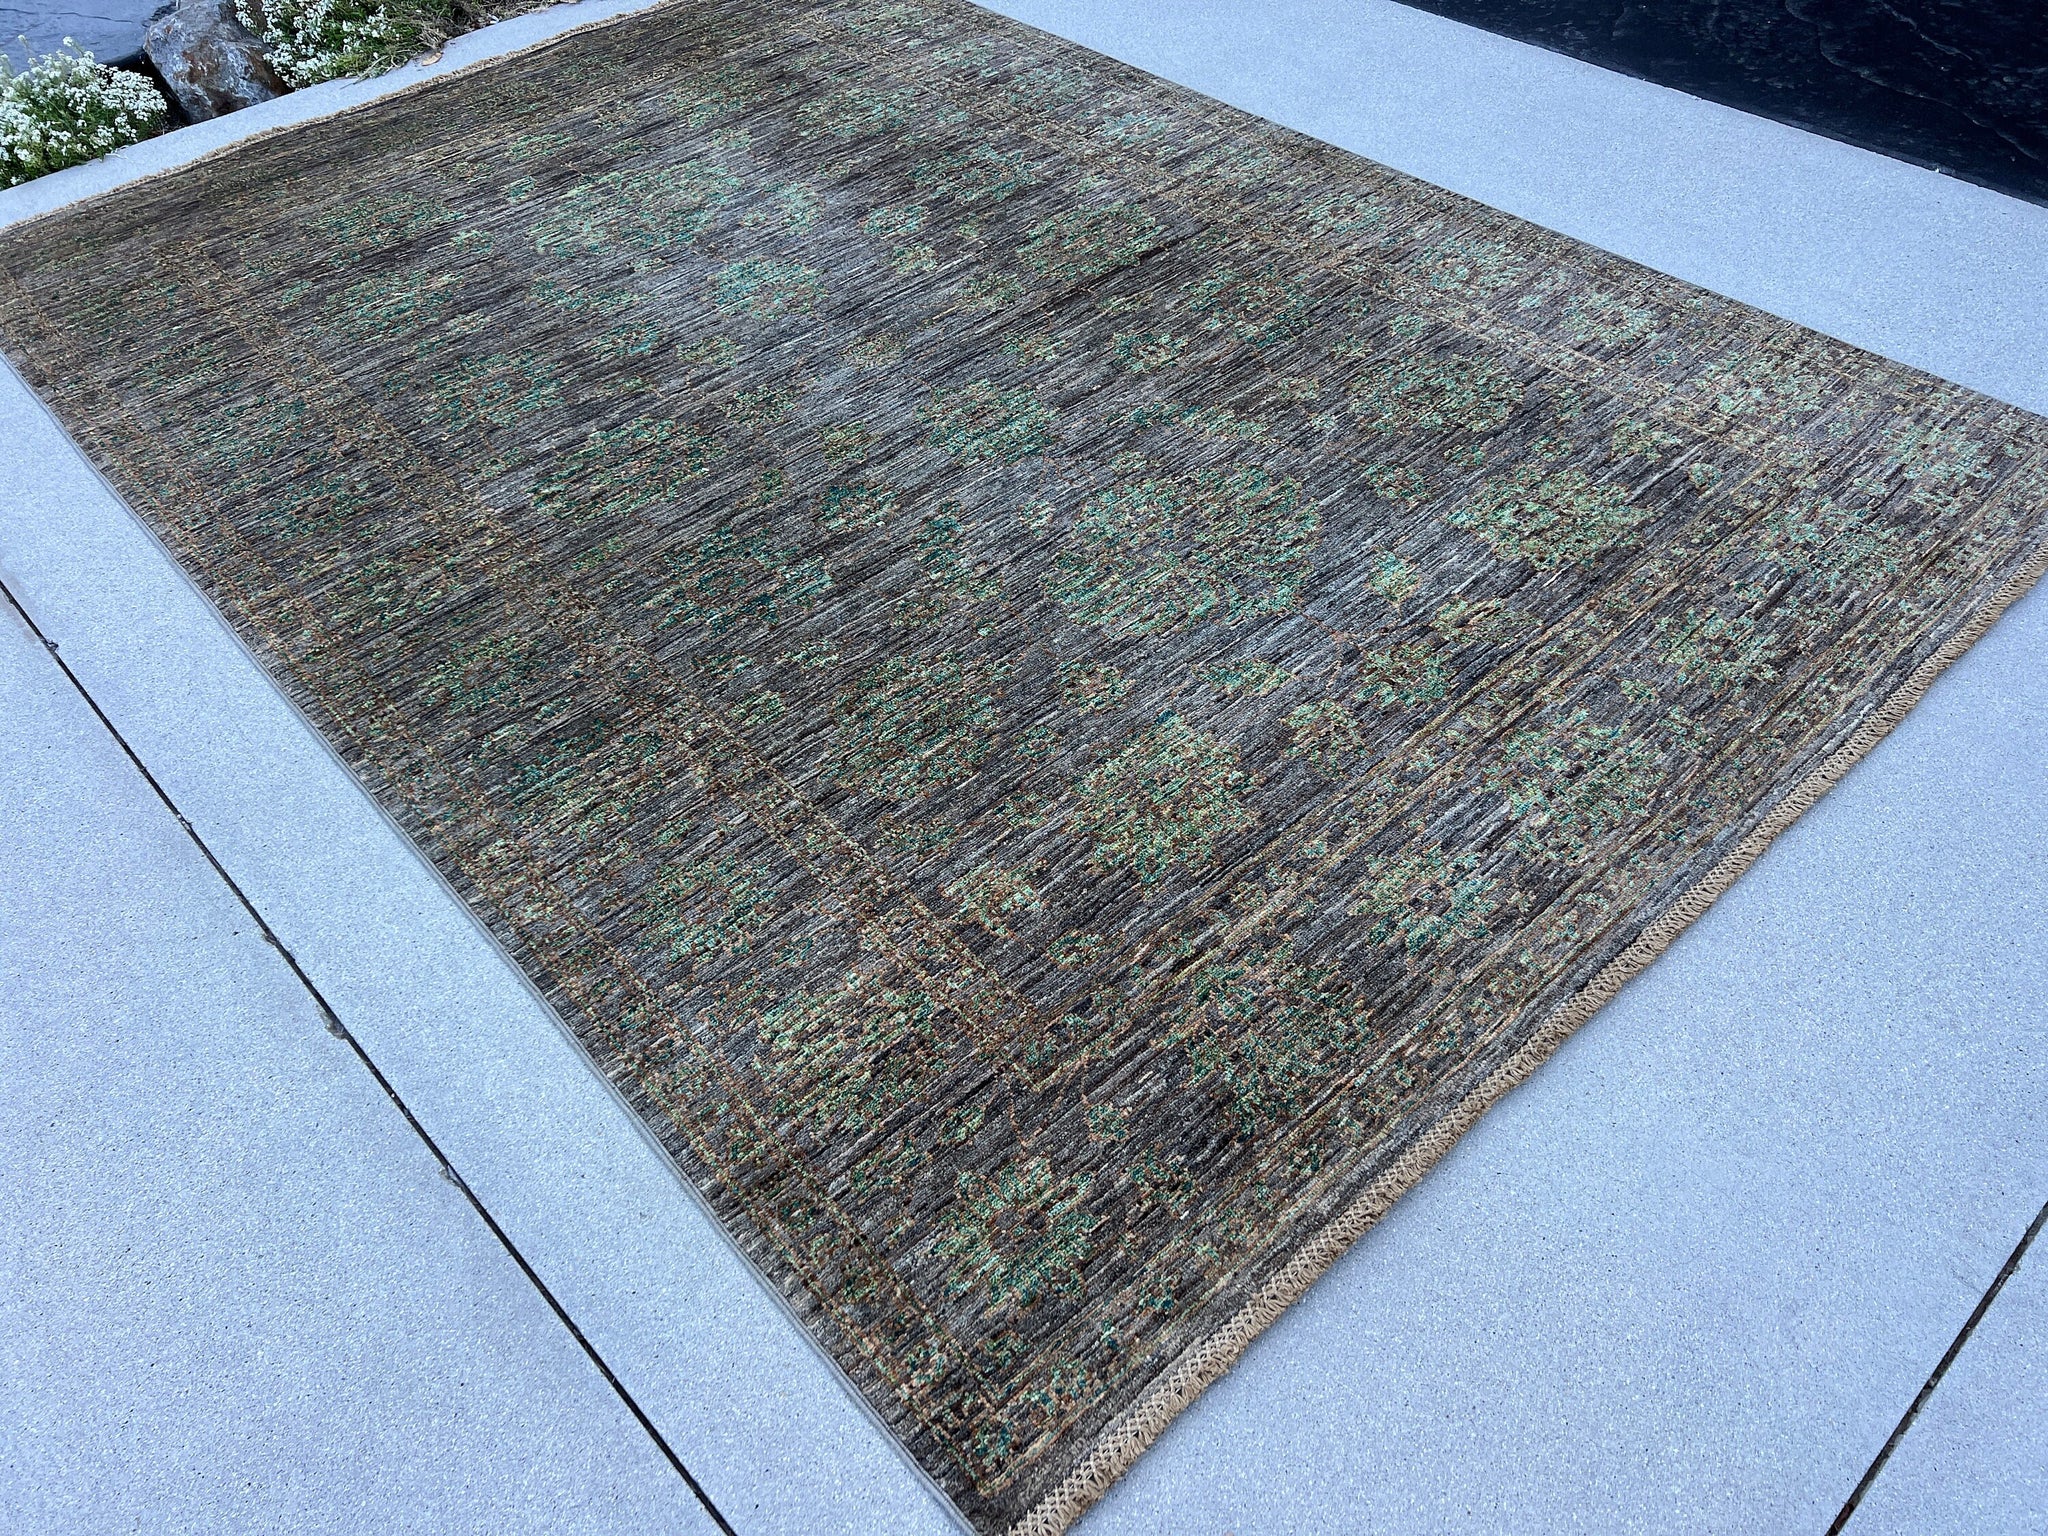 6x8 (180x245) Handmade Afghan Rug | Muted Neutral Chocolate Brown Forest Moss Green Grey | Persian Turkish Hand Knotted Oushak Wool